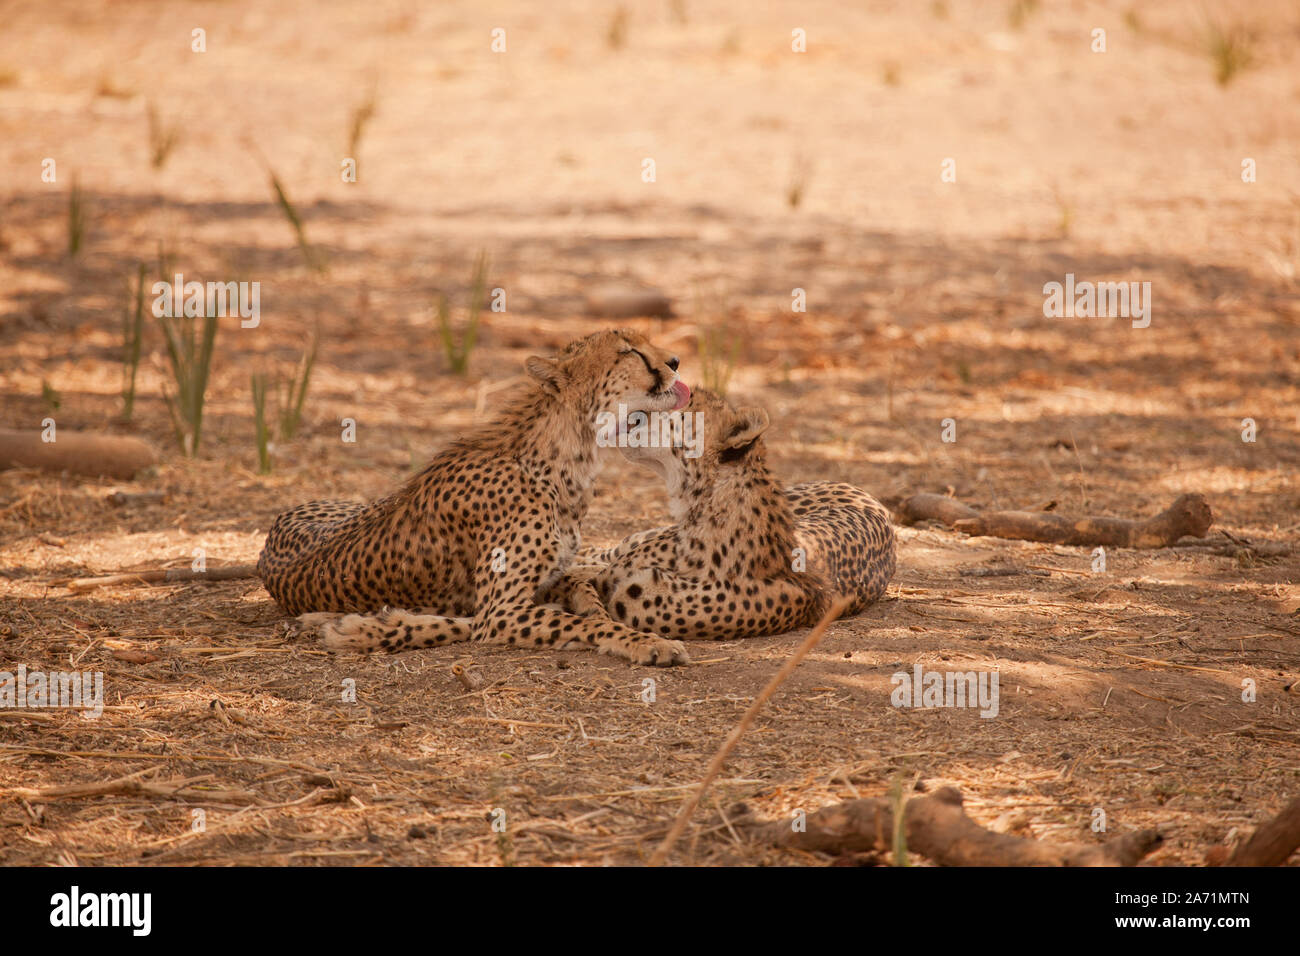 A pair of young cheetahs nuzzling and licking each other in the shade during the hot afternoon sun, Ruaha National Park, Tanzania Stock Photo